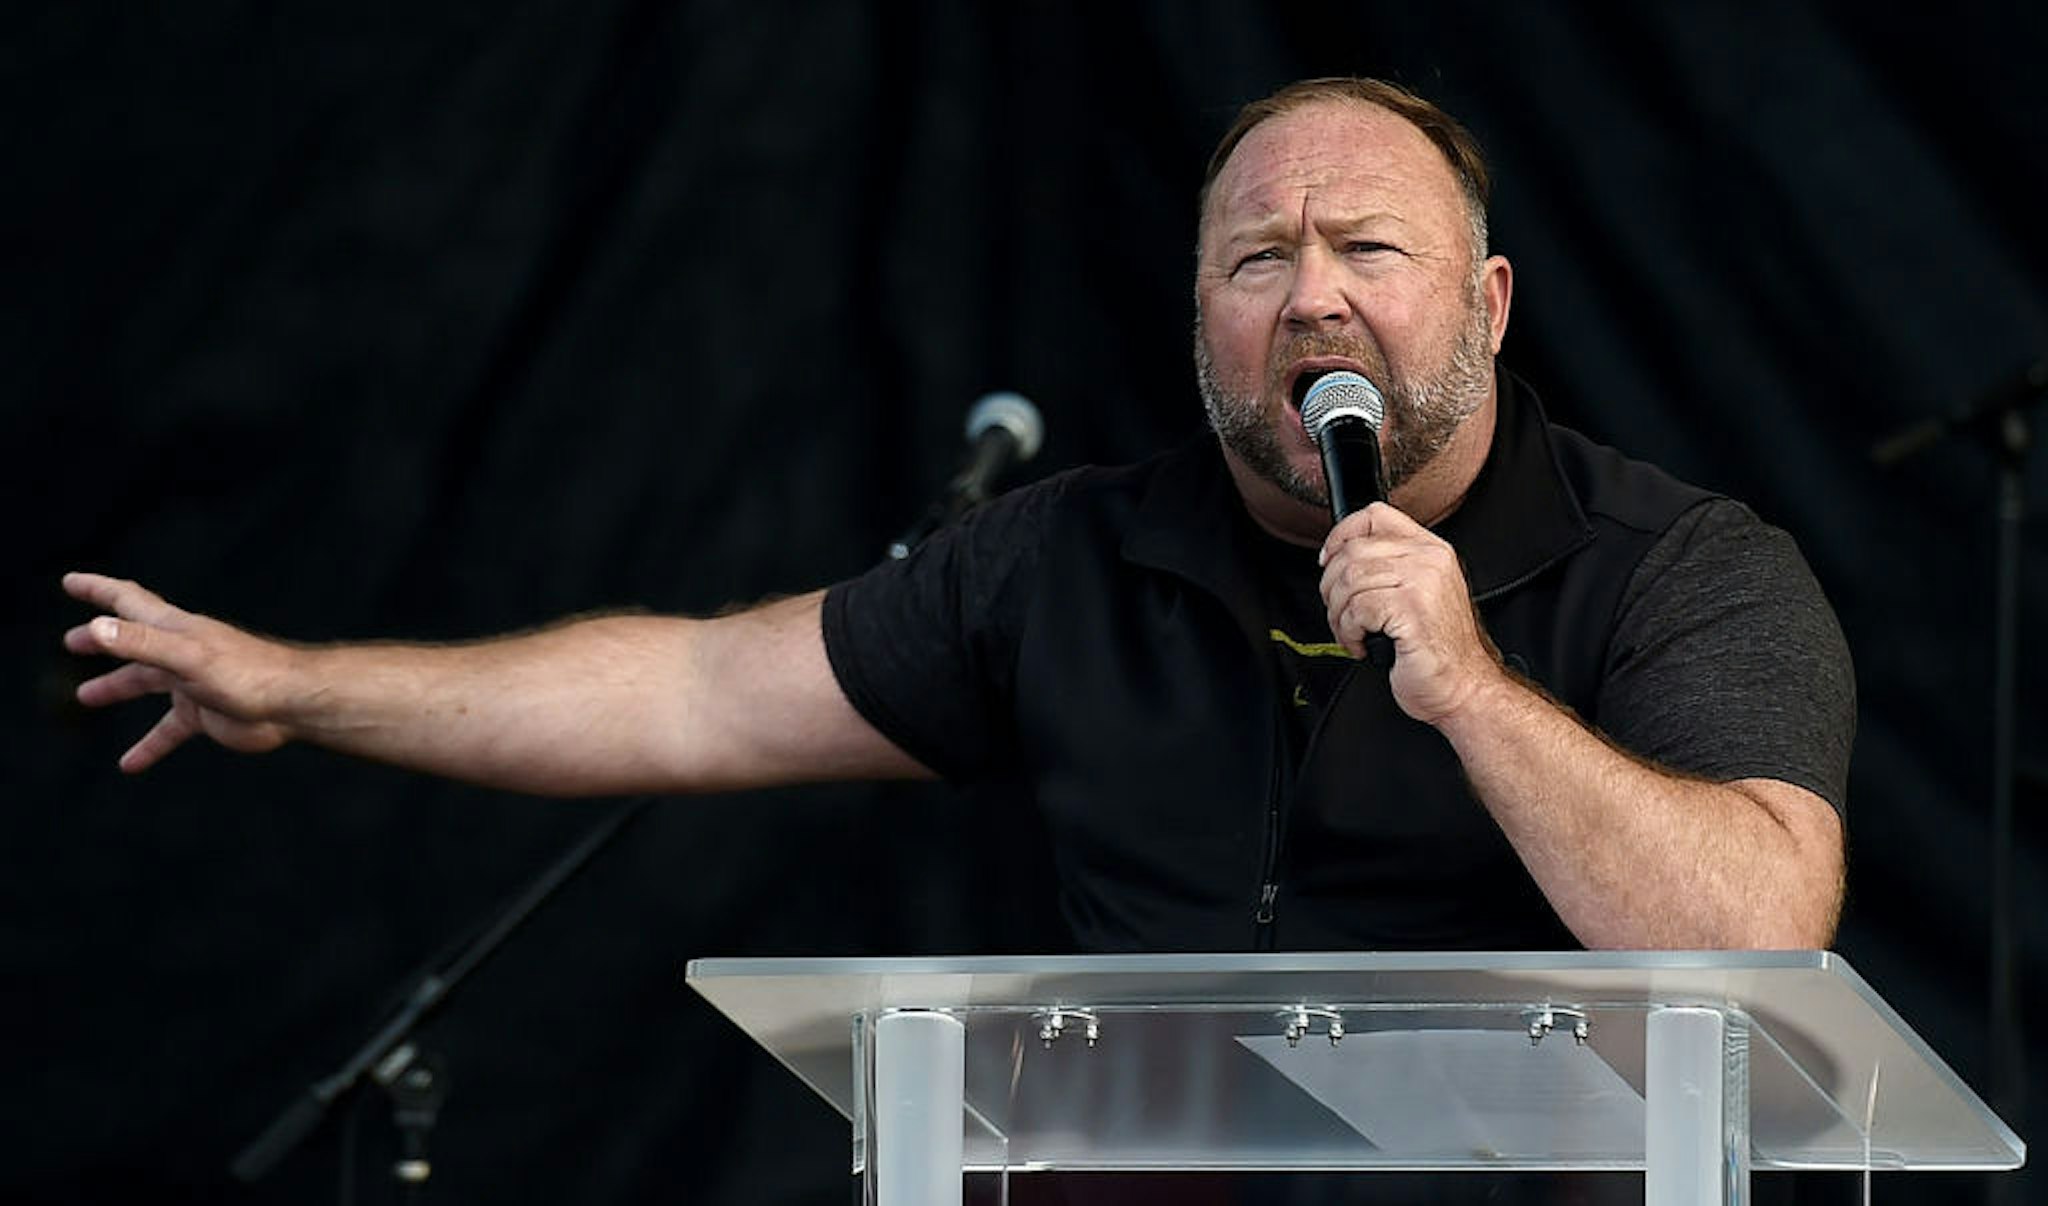 US far-right radio show Alex Jones speaks to supporters of US President Donald Trump as they demonstrate in Washington, DC, on December 12, 2020, to protest the 2020 election. (Photo by Olivier DOULIERY / AFP) (Photo by OLIVIER DOULIERY/AFP via Getty Images)